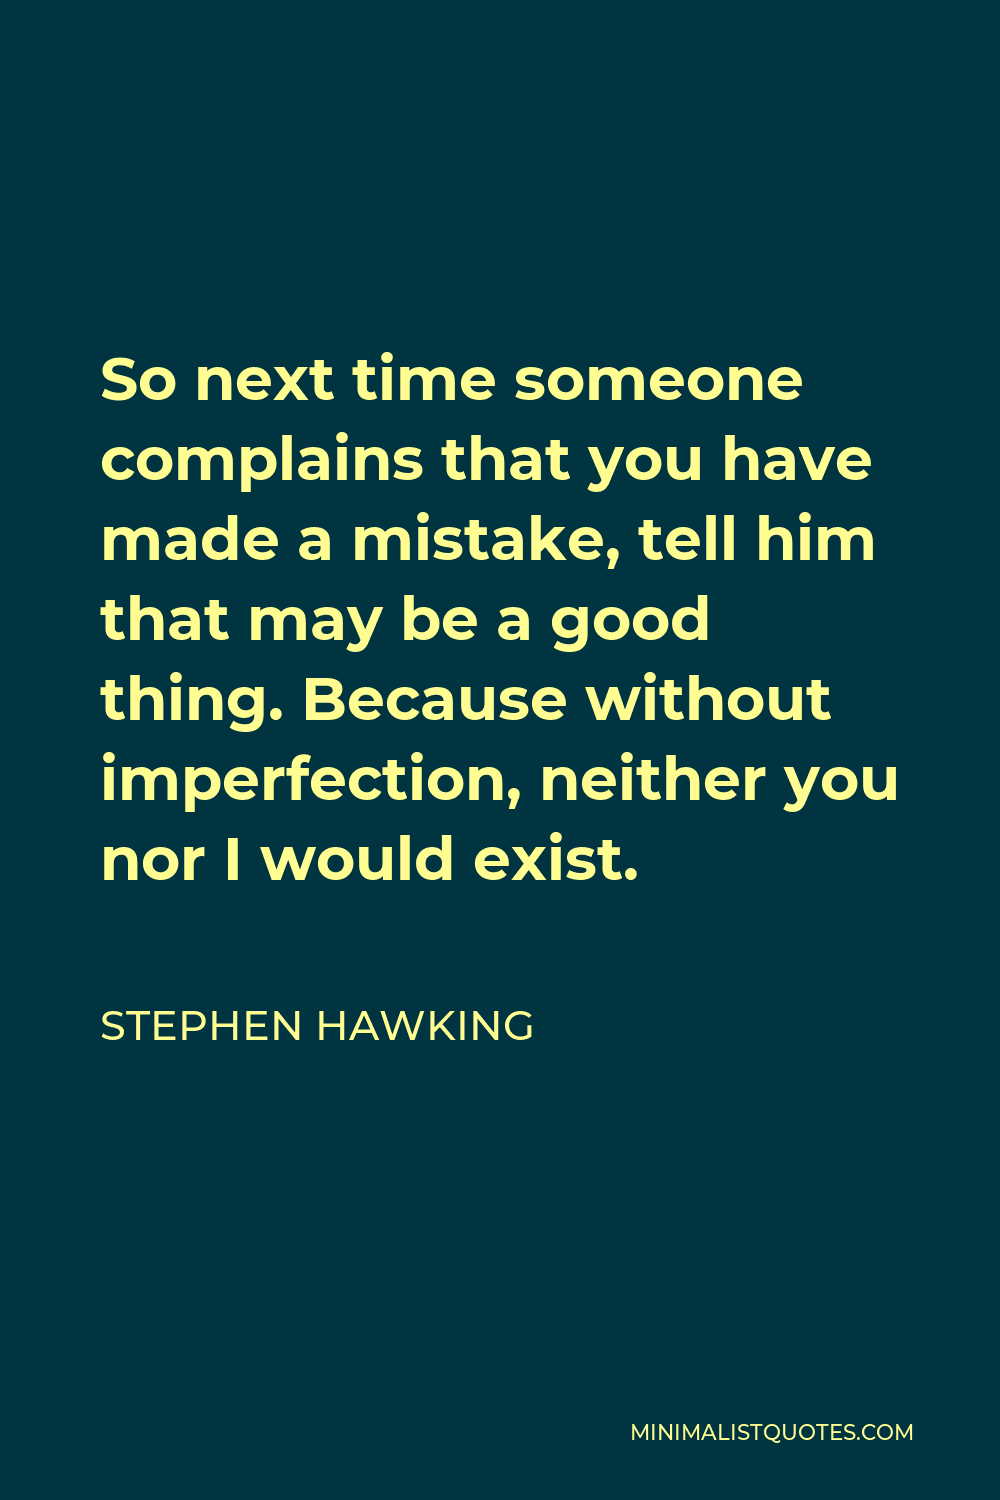 Stephen Hawking Quote - So next time someone complains that you have made a mistake, tell him that may be a good thing. Because without imperfection, neither you nor I would exist.